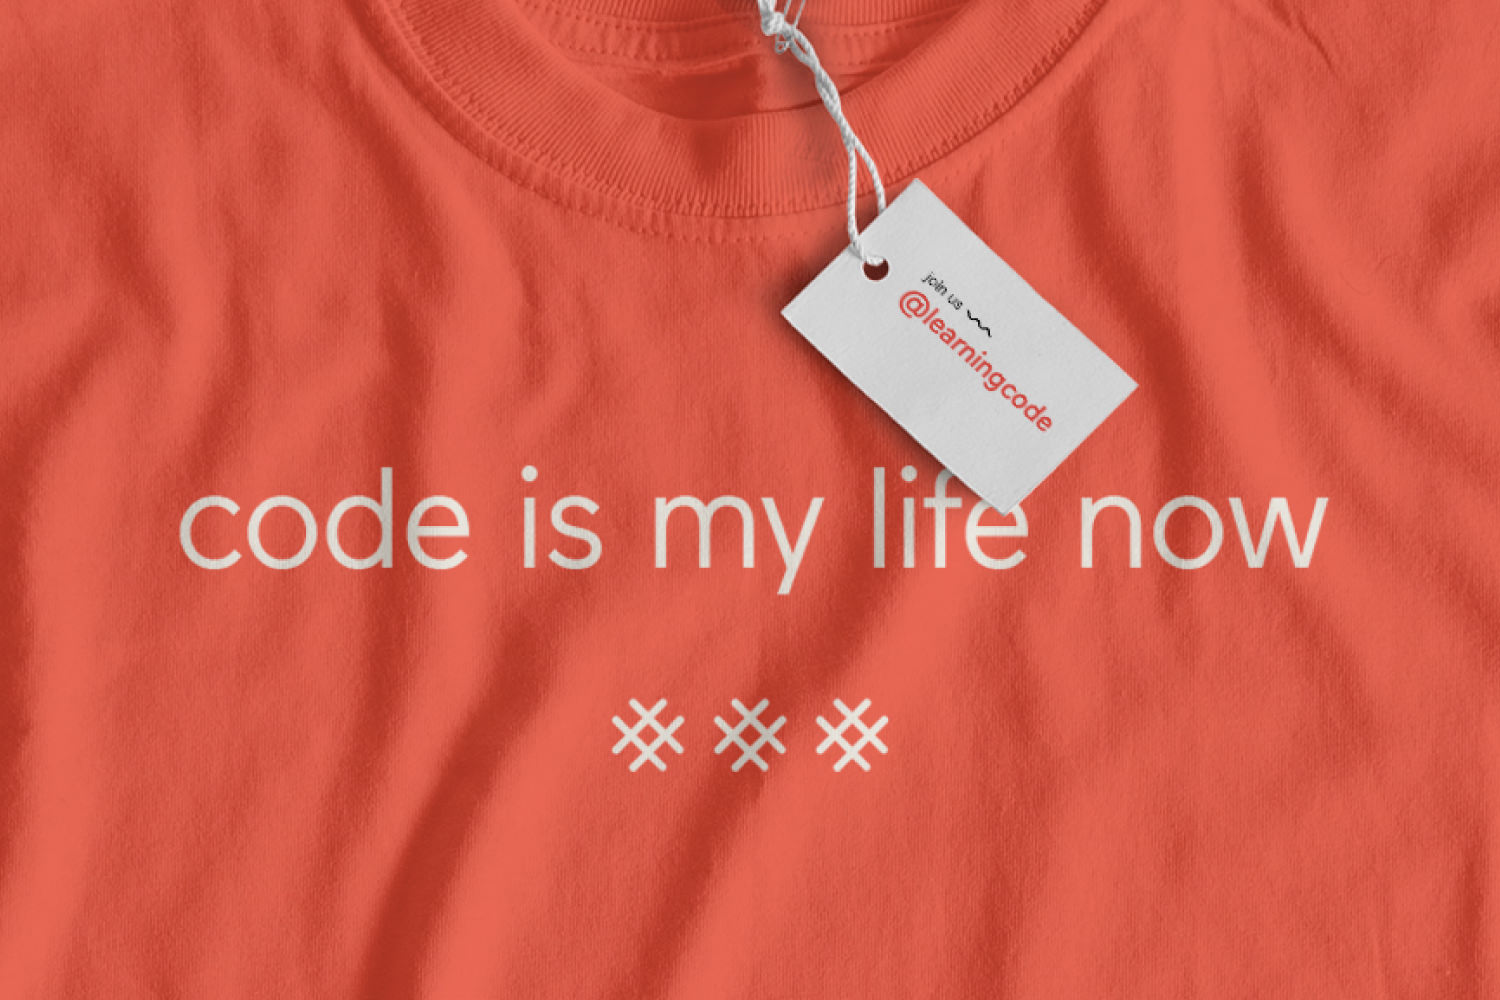 Printed t-shirt and garment tag that promote Teens Learning Code